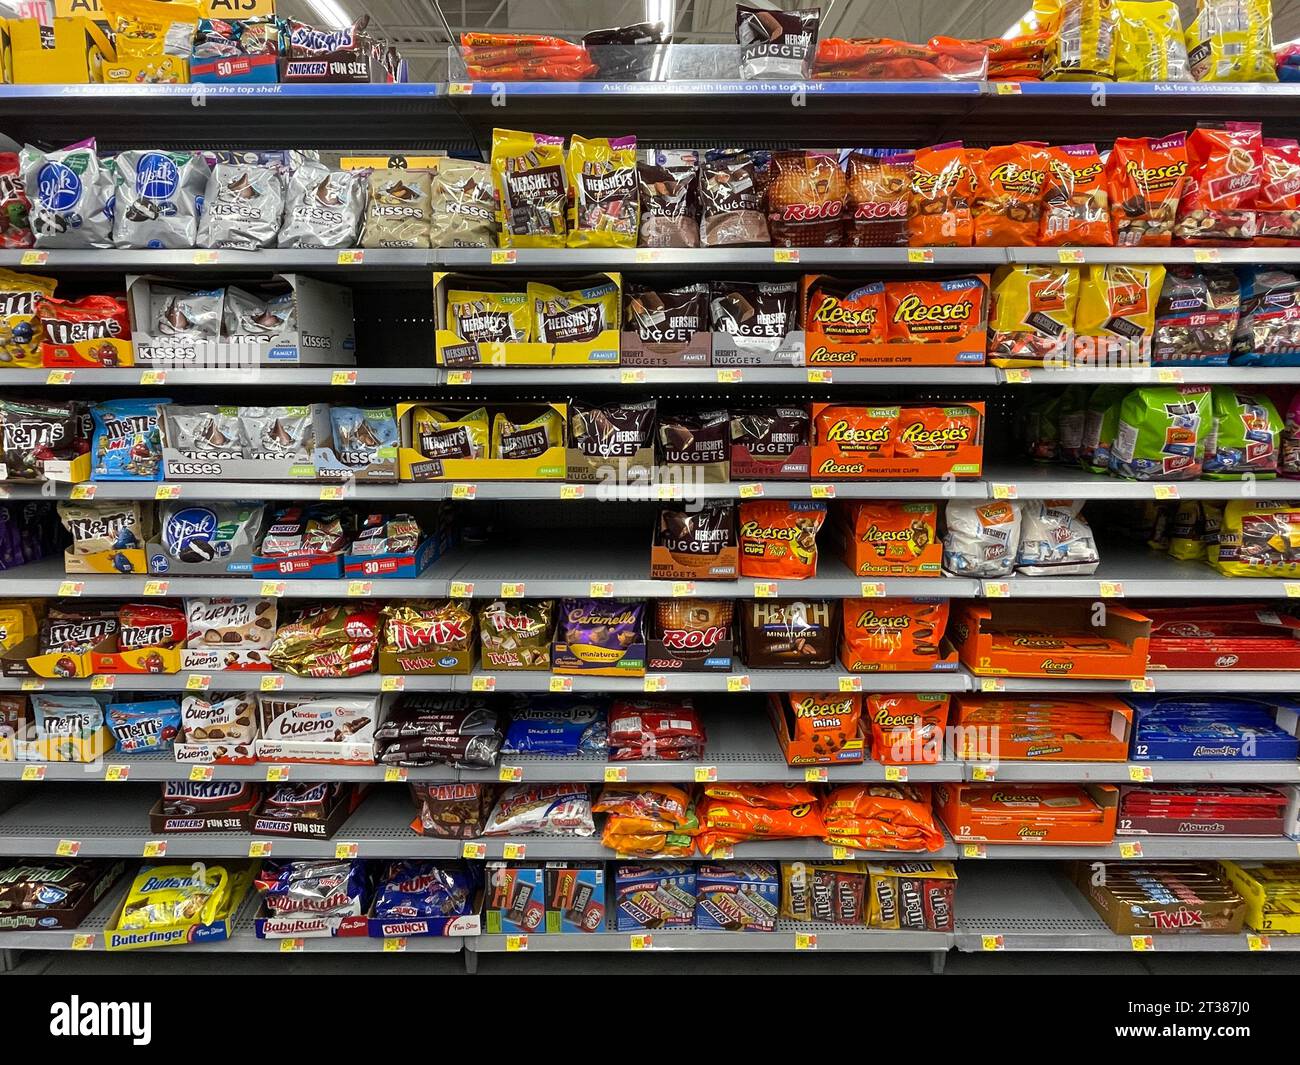 https://c8.alamy.com/comp/2T387J0/grovetown-ga-usa-08-06-23-walmart-grocery-store-bag-candy-section-and-prices-2T387J0.jpg